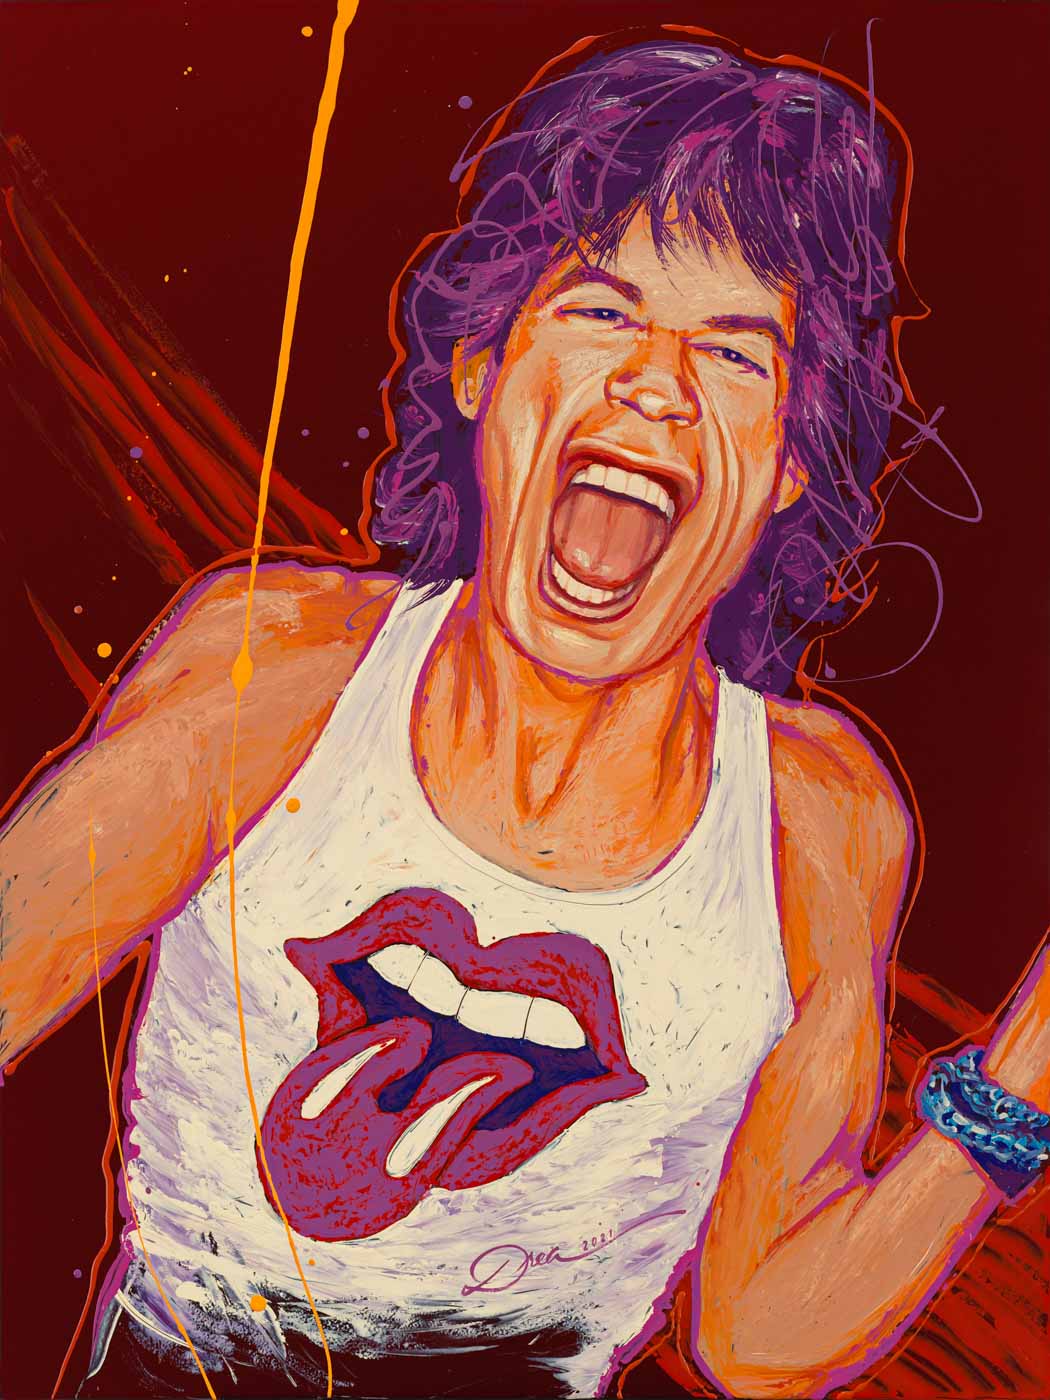 It’s Only Rock & Roll – Mick Jagger